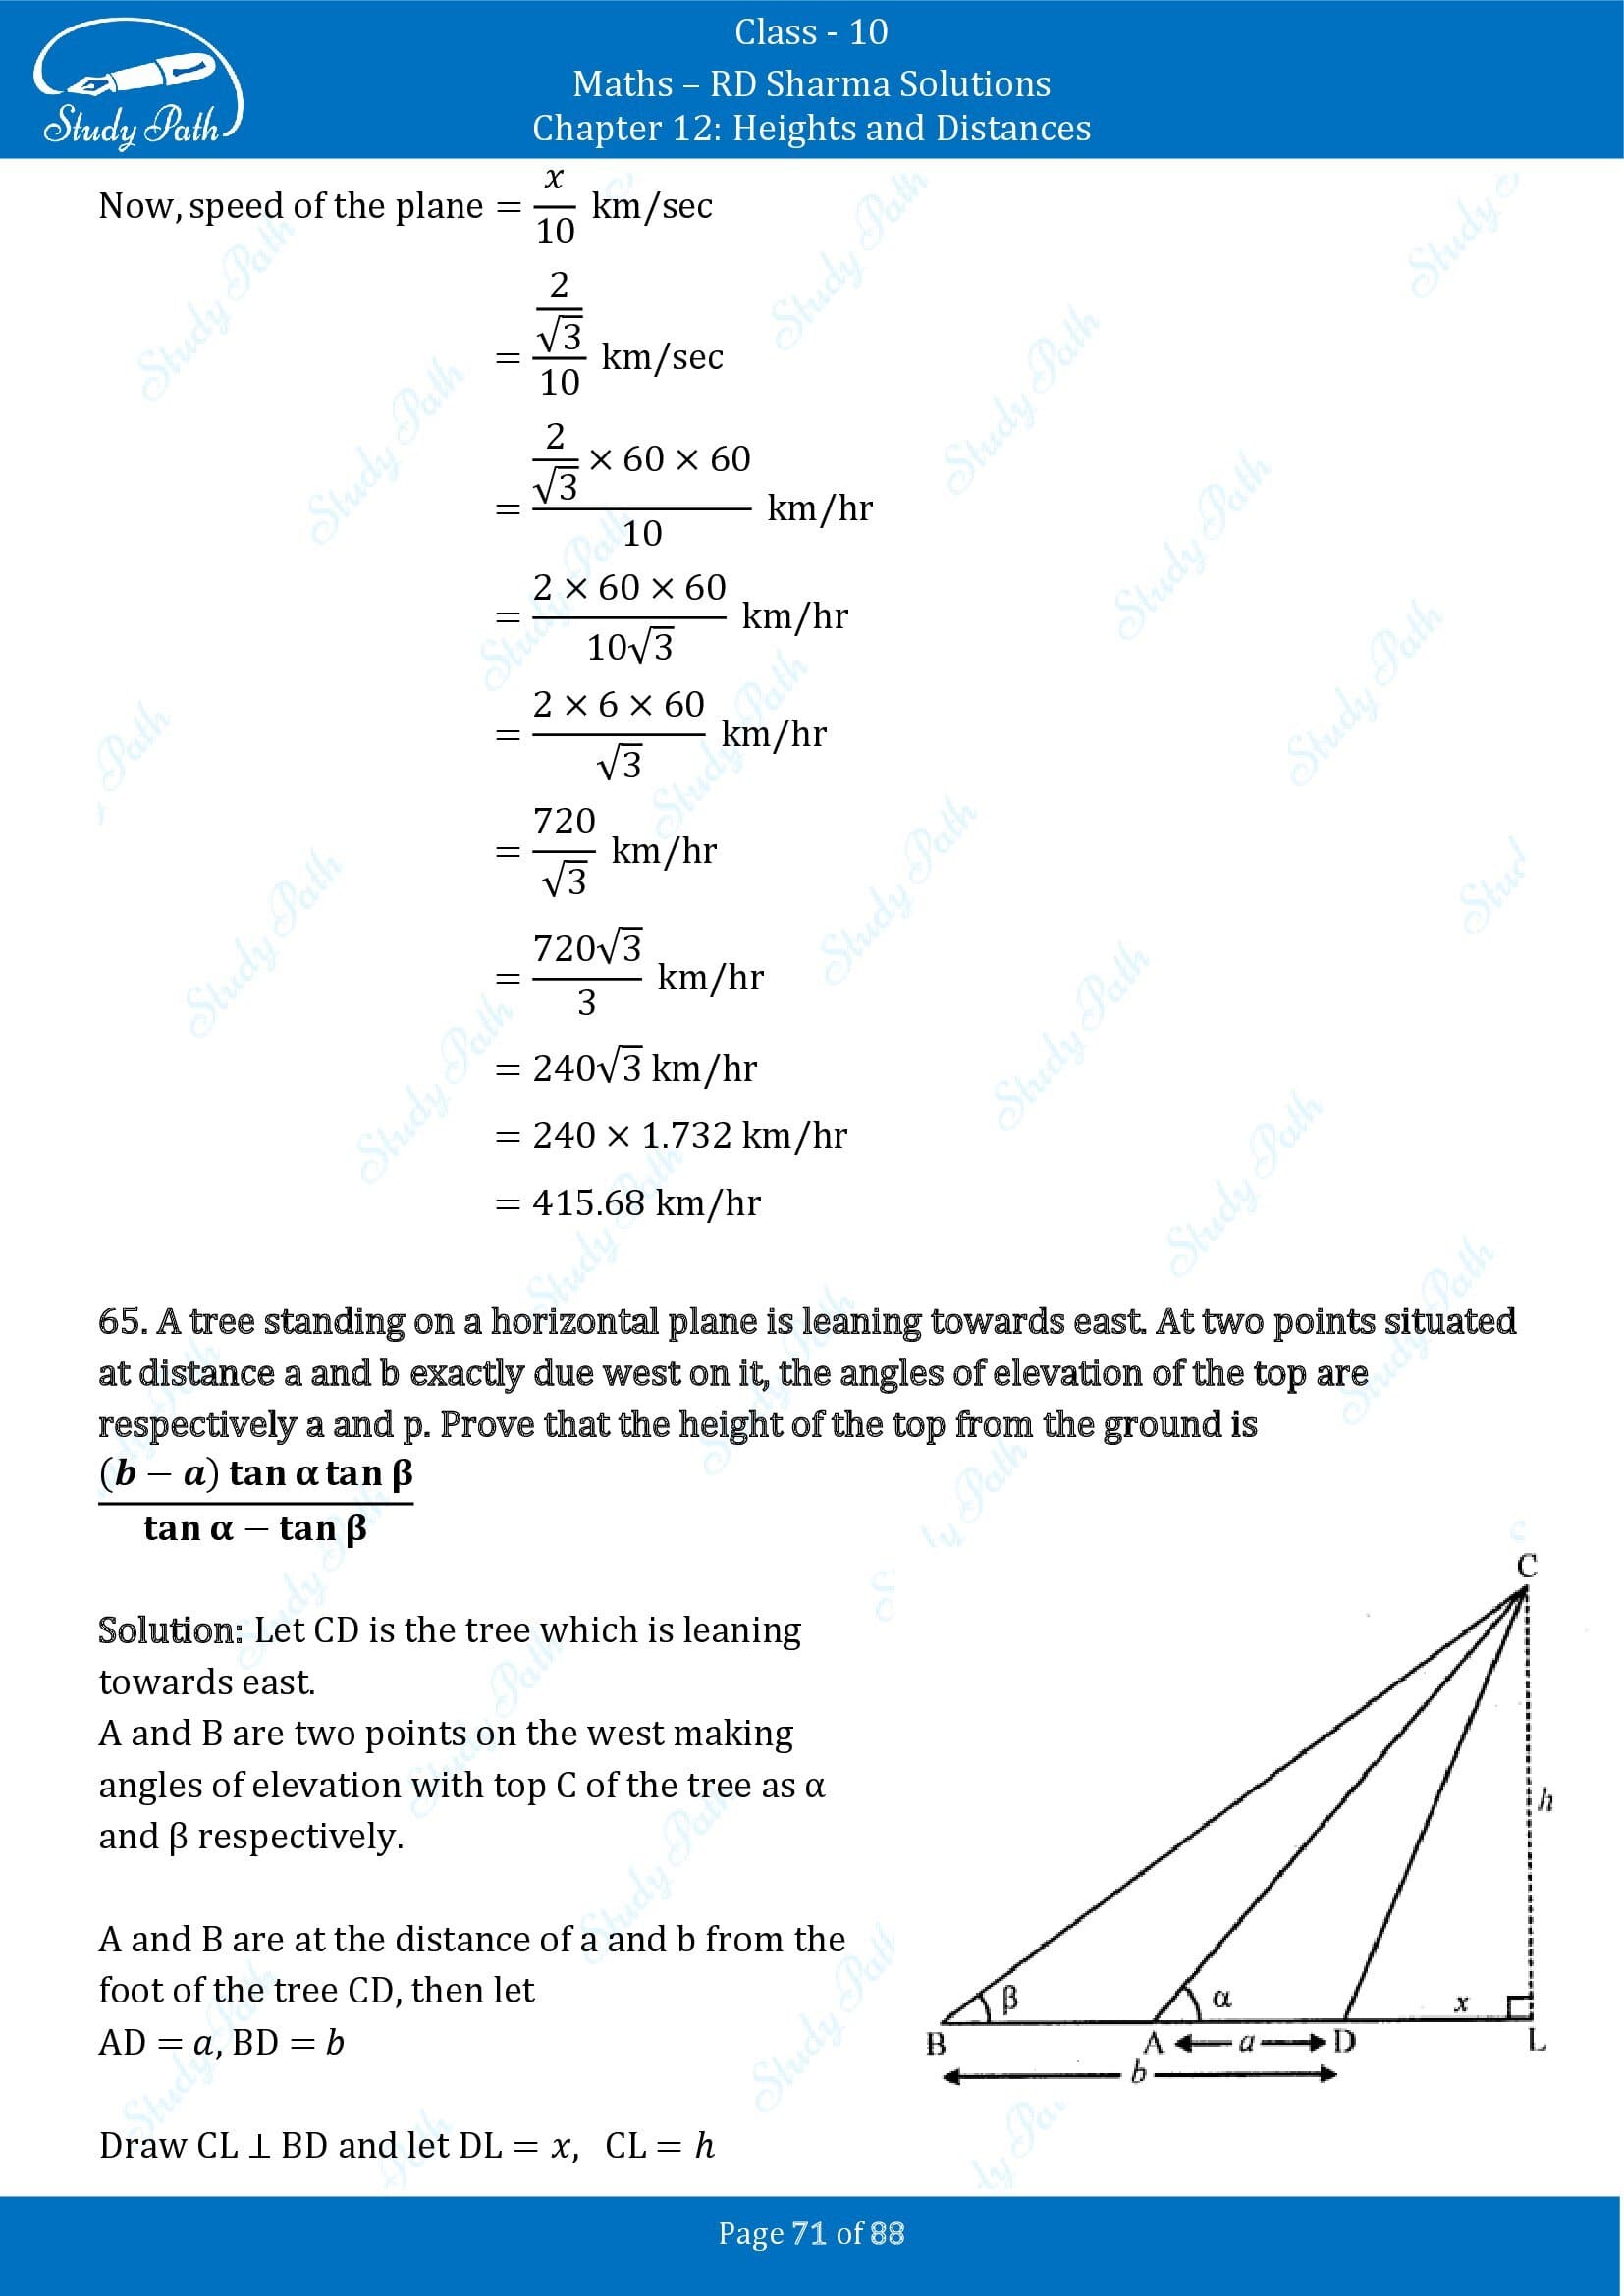 RD Sharma Solutions Class 10 Chapter 12 Heights and Distances Exercise 12.1 00071